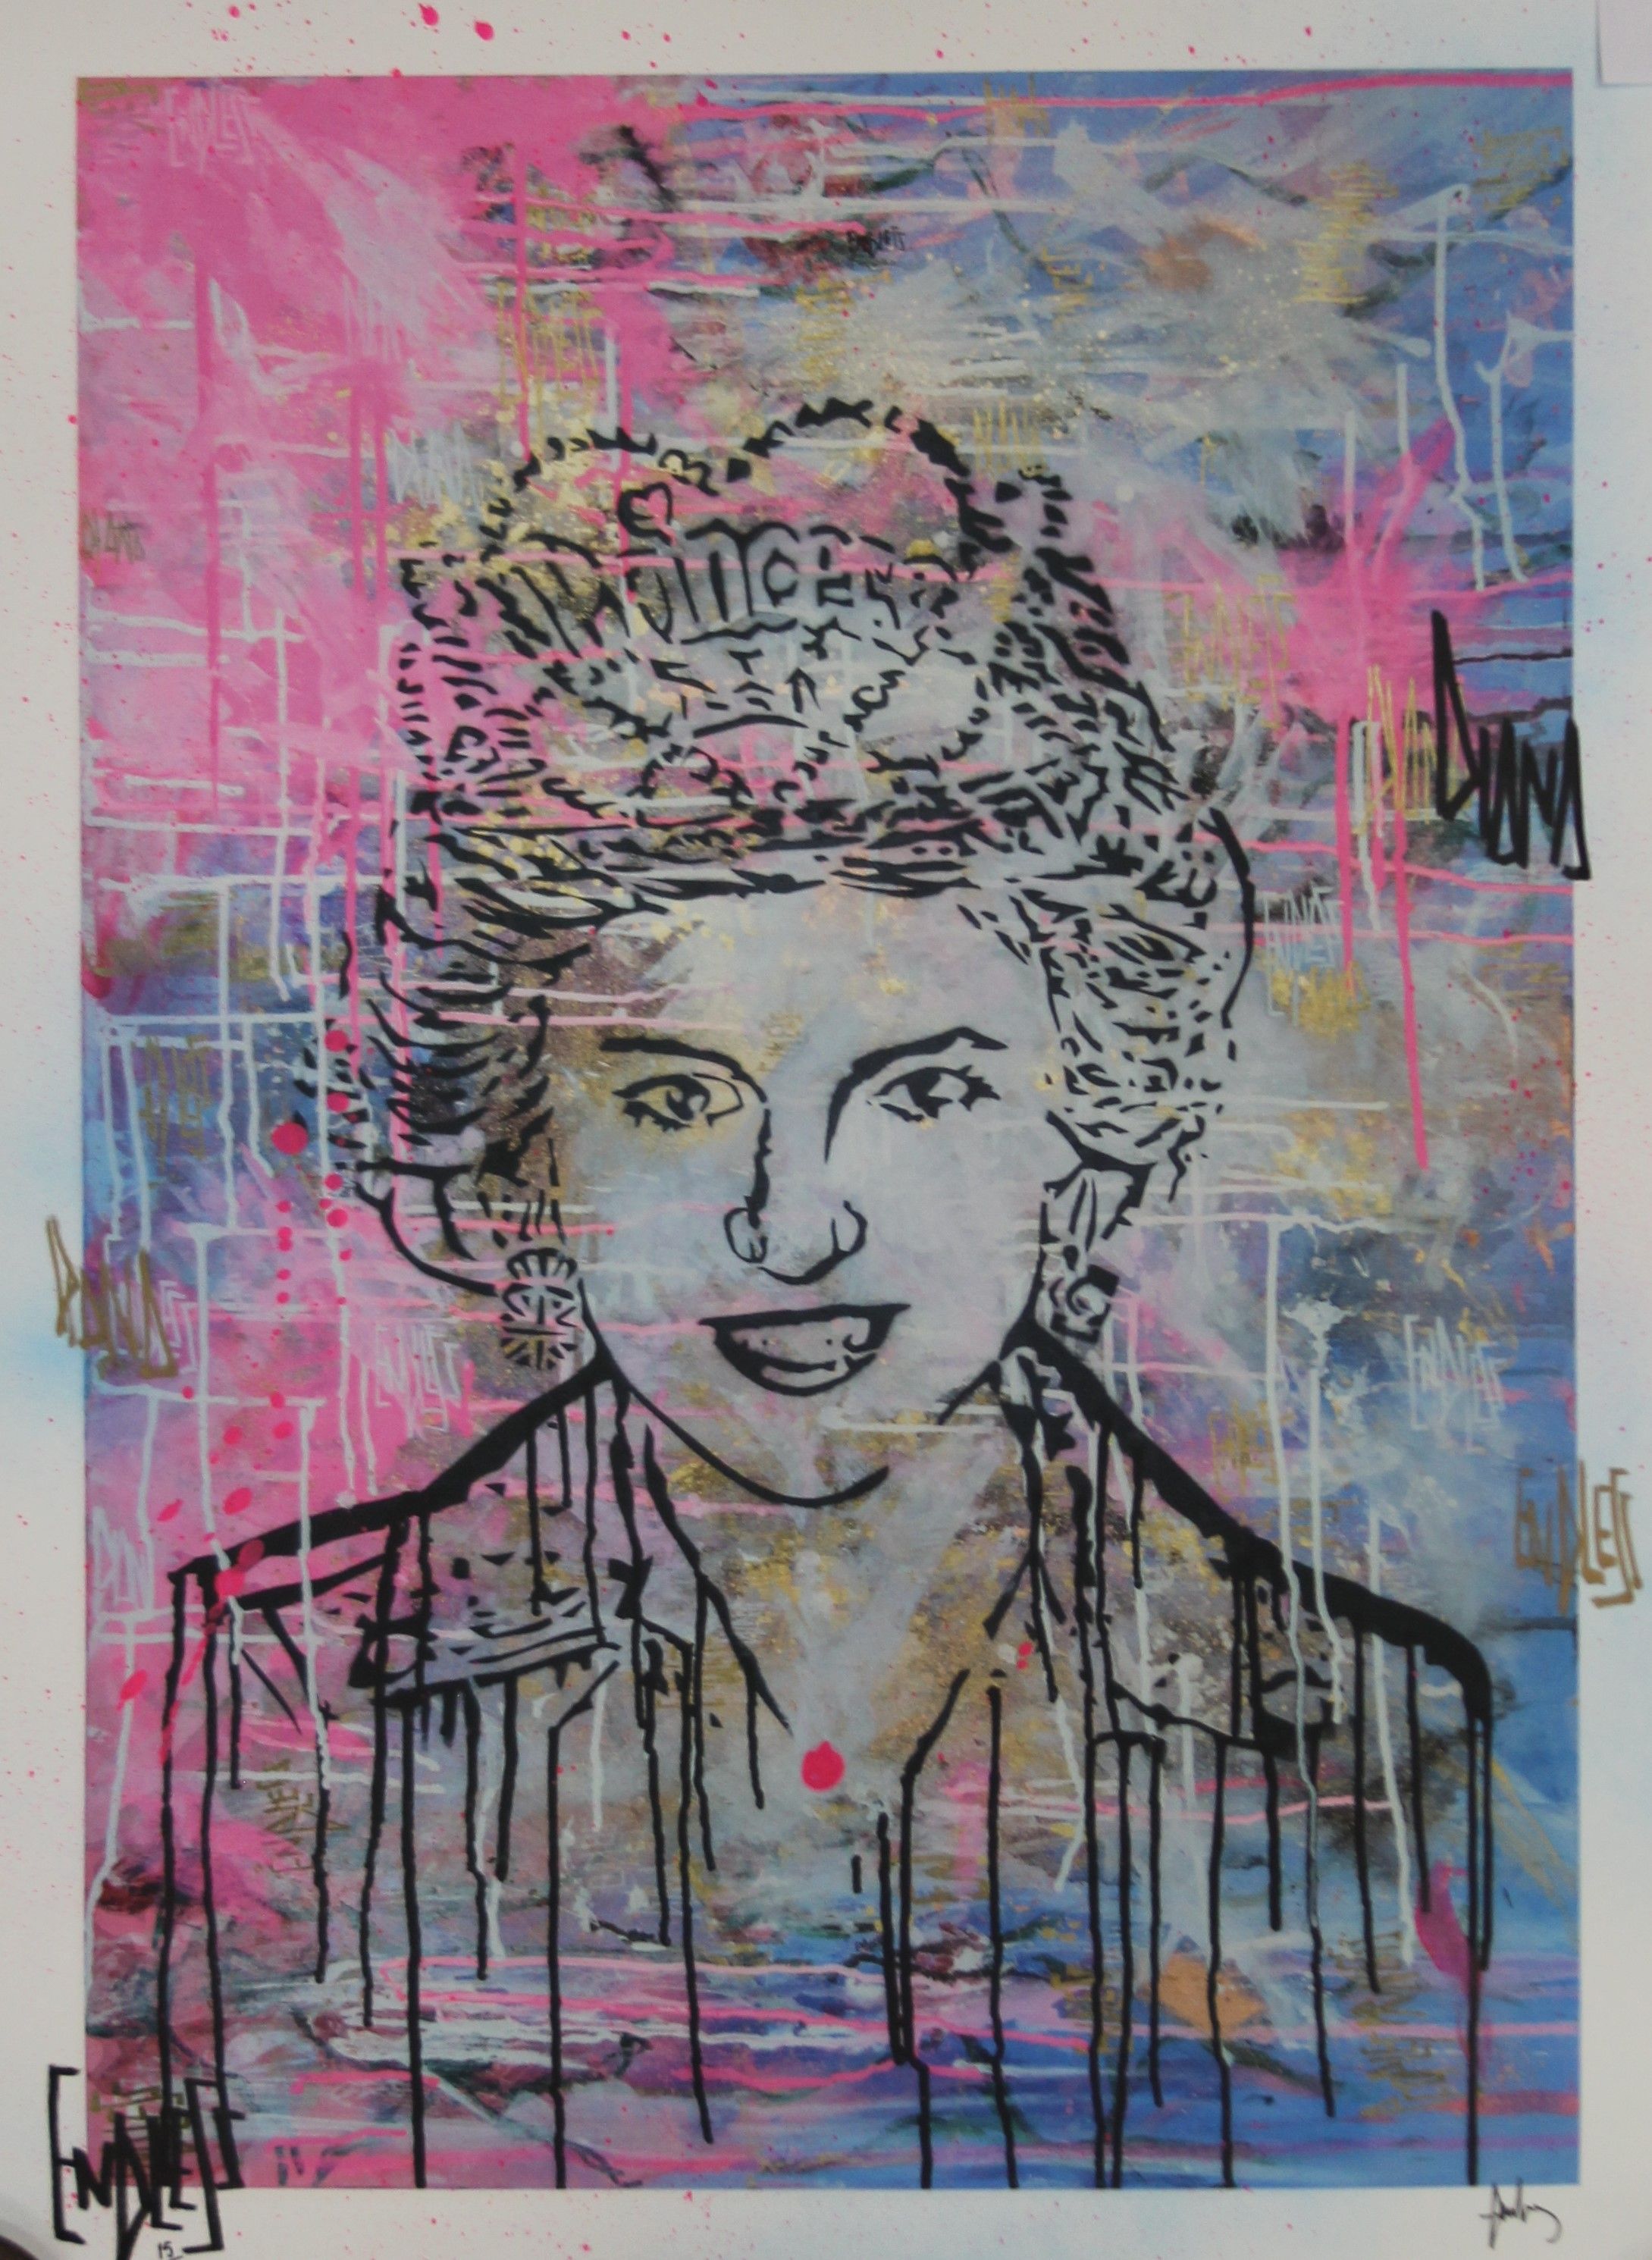 ENDLESS (British), Diana, limited edition hand embellished print, numbered 15/15, - Image 2 of 3